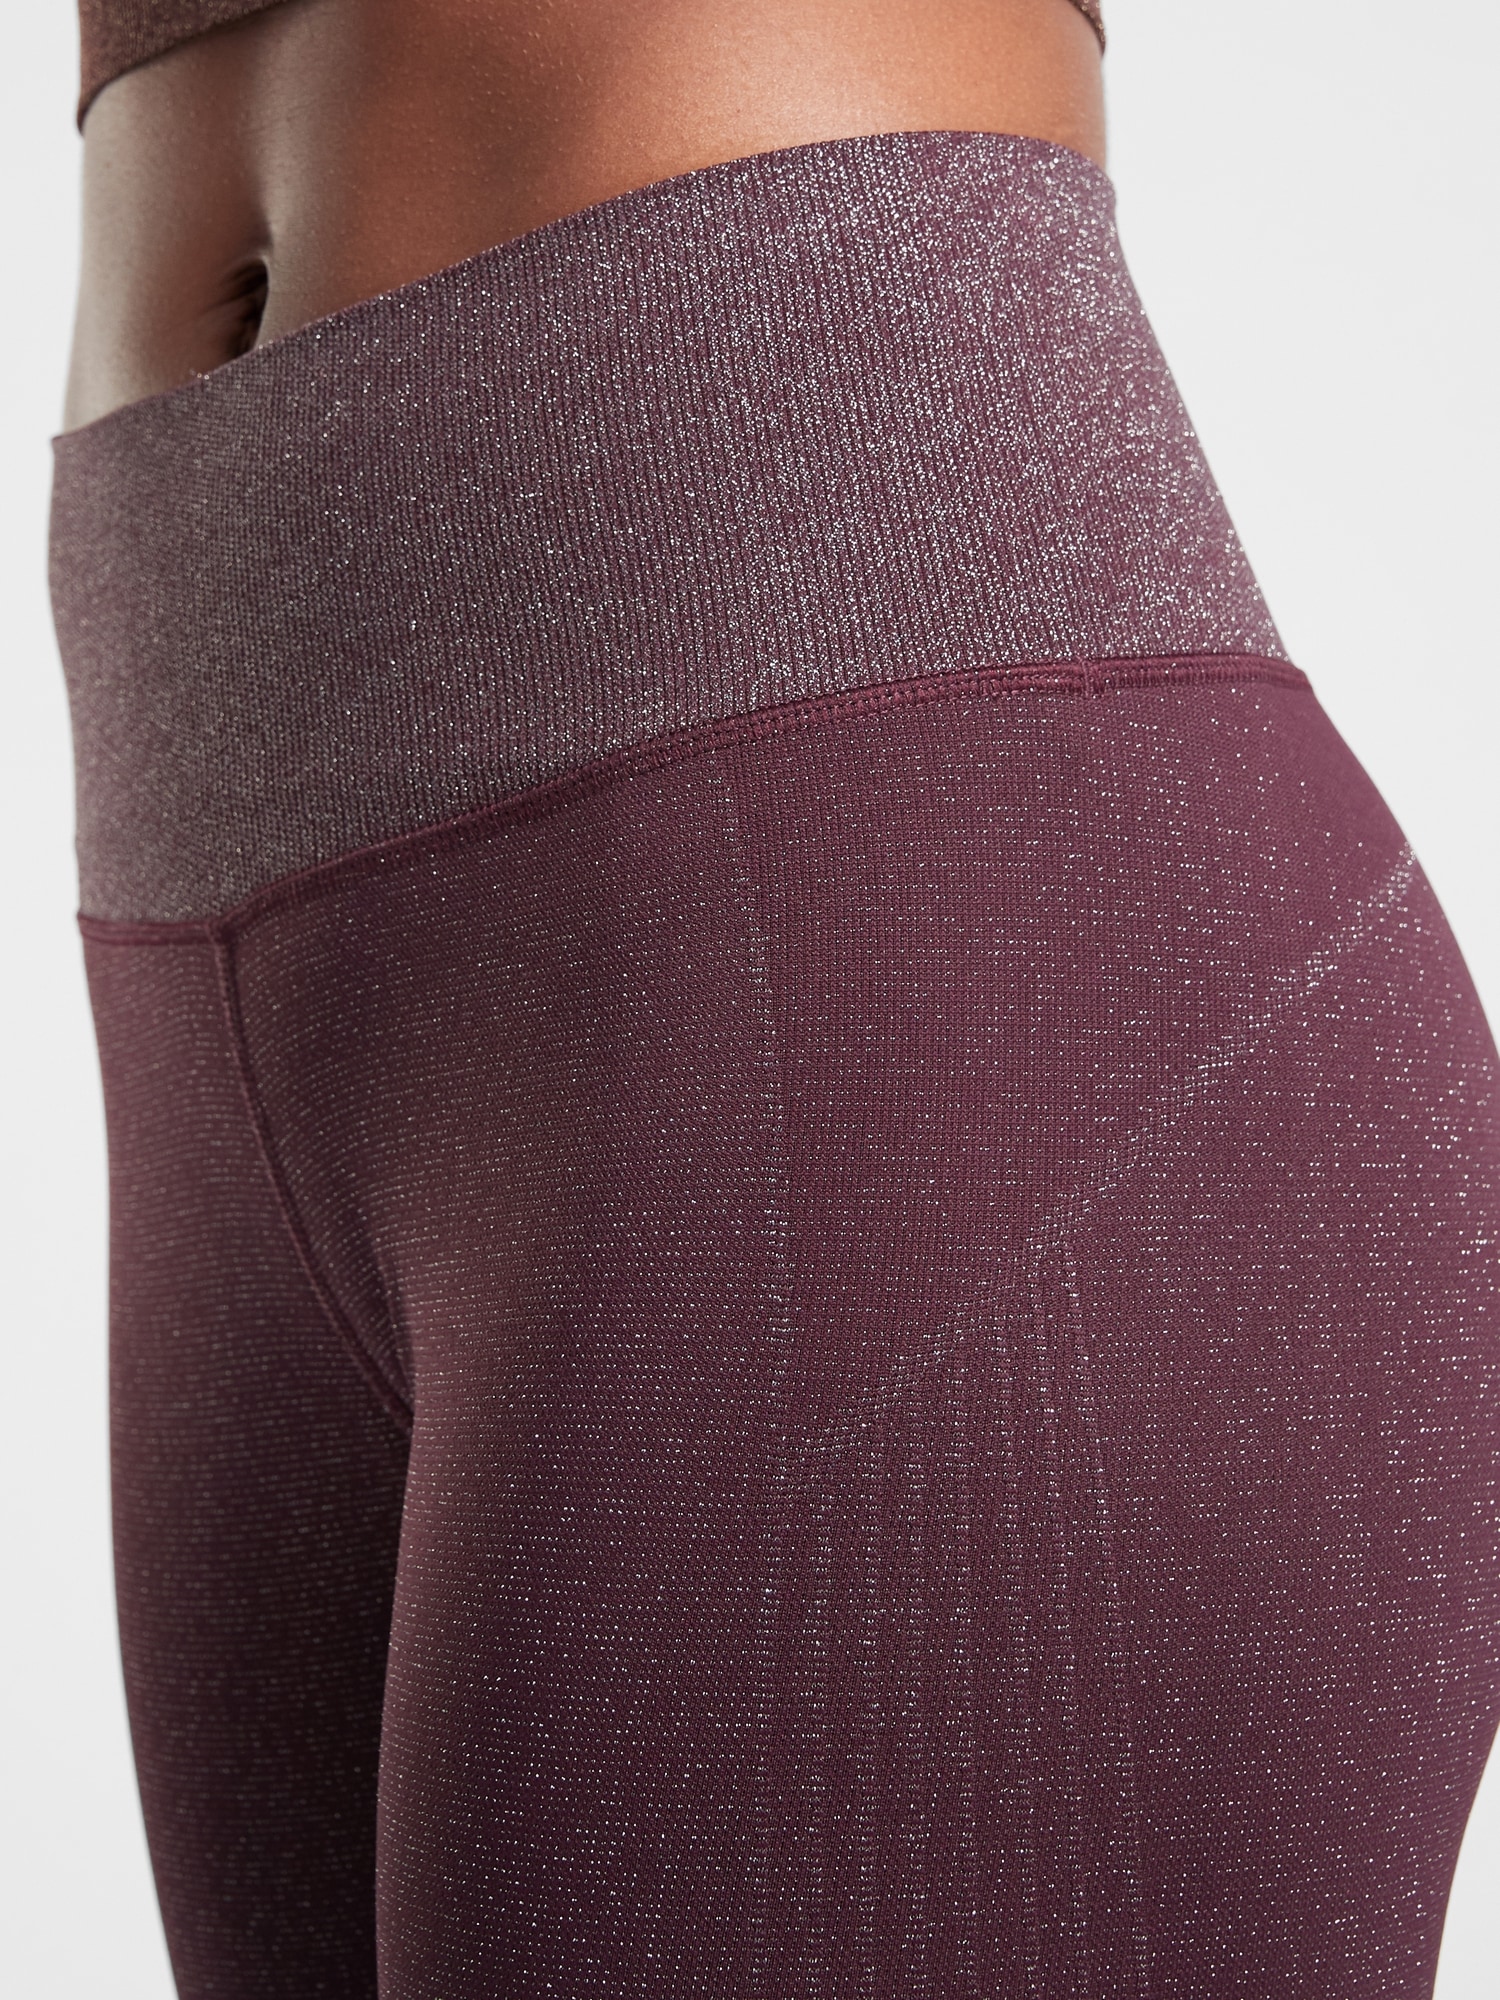 ATHLETA Elation Tight Antique Burgundy NWT  Leggings are not pants,  Tights, Yoga pants workout